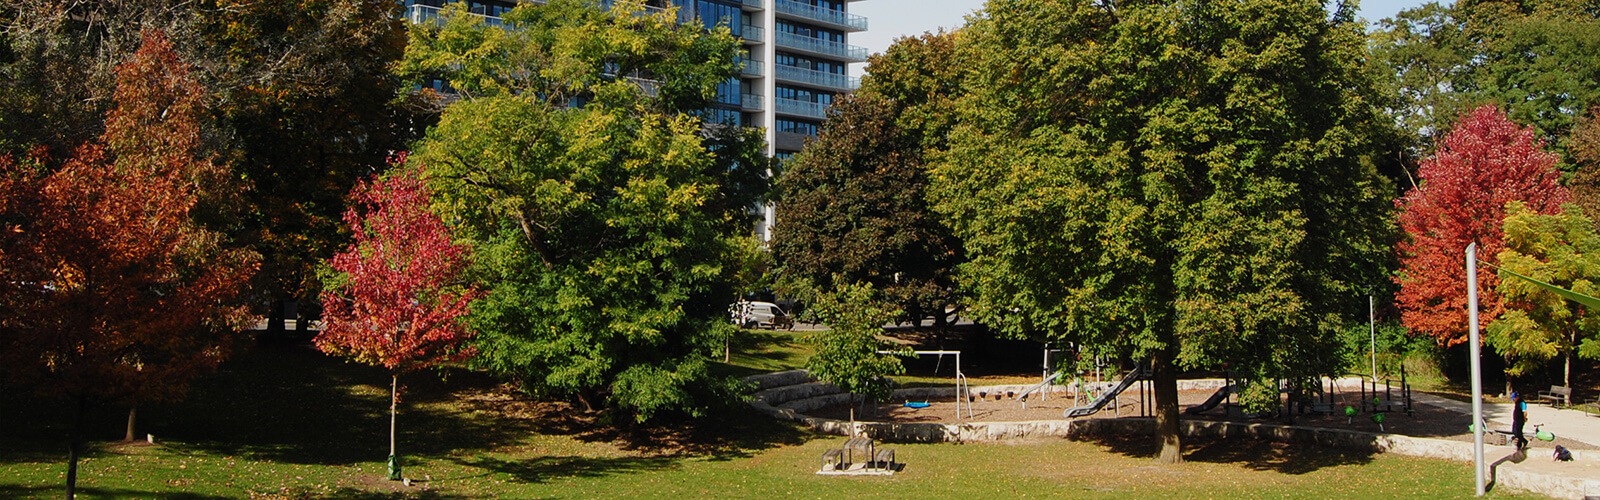 Children's playground surrounded by lush trees and park space. Condo building can be seen in the background behind the trees.